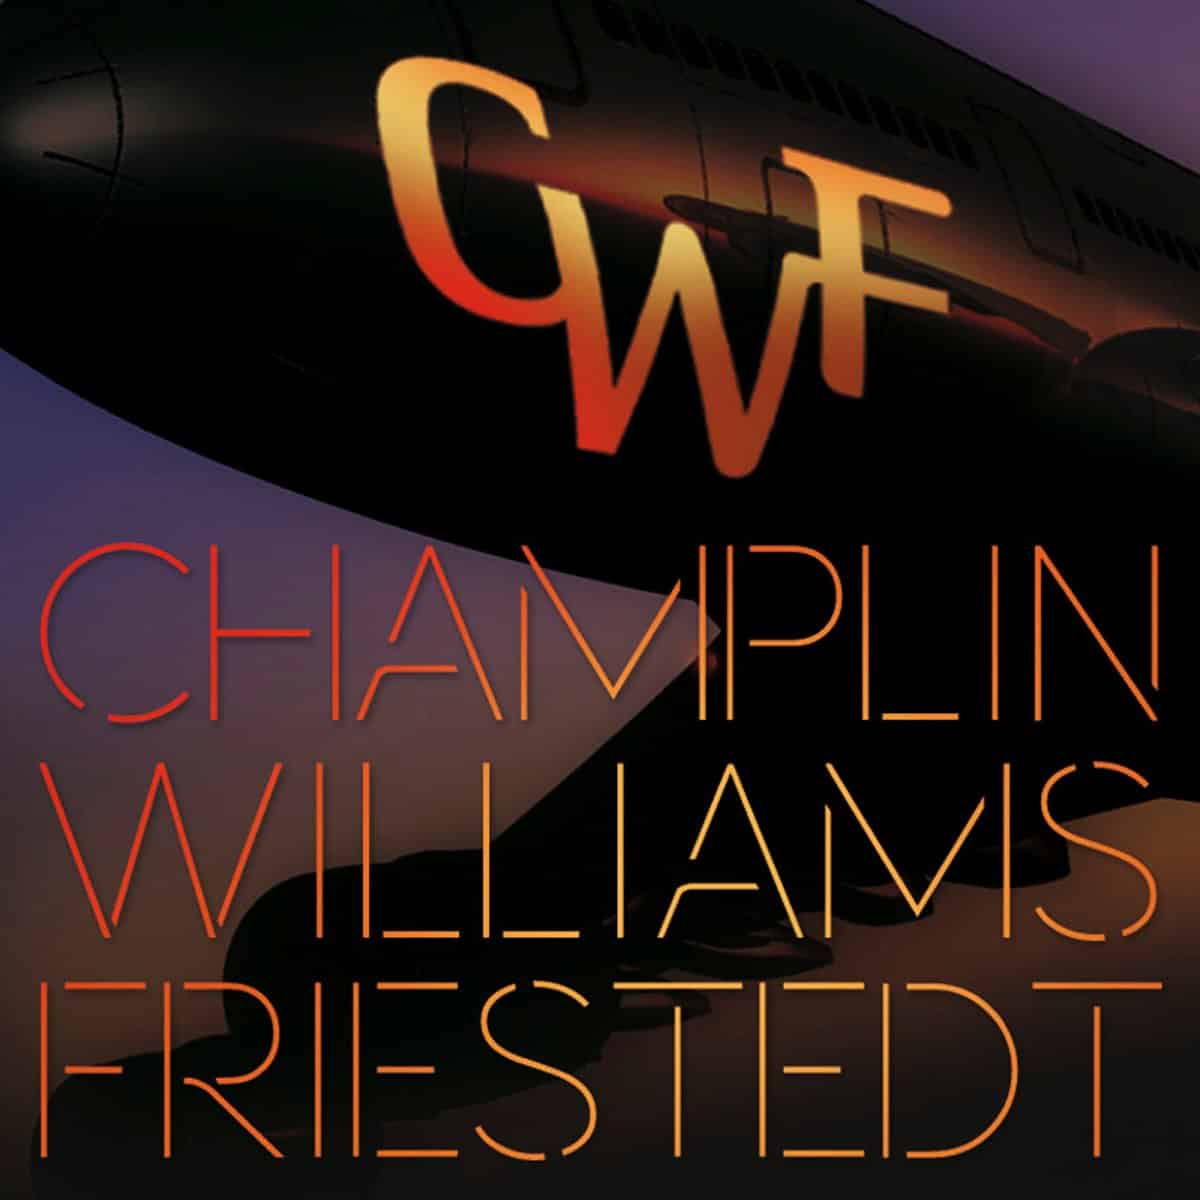 NY VIDEO: Champlin, Williams & Friestedt - Aria (Live) 1